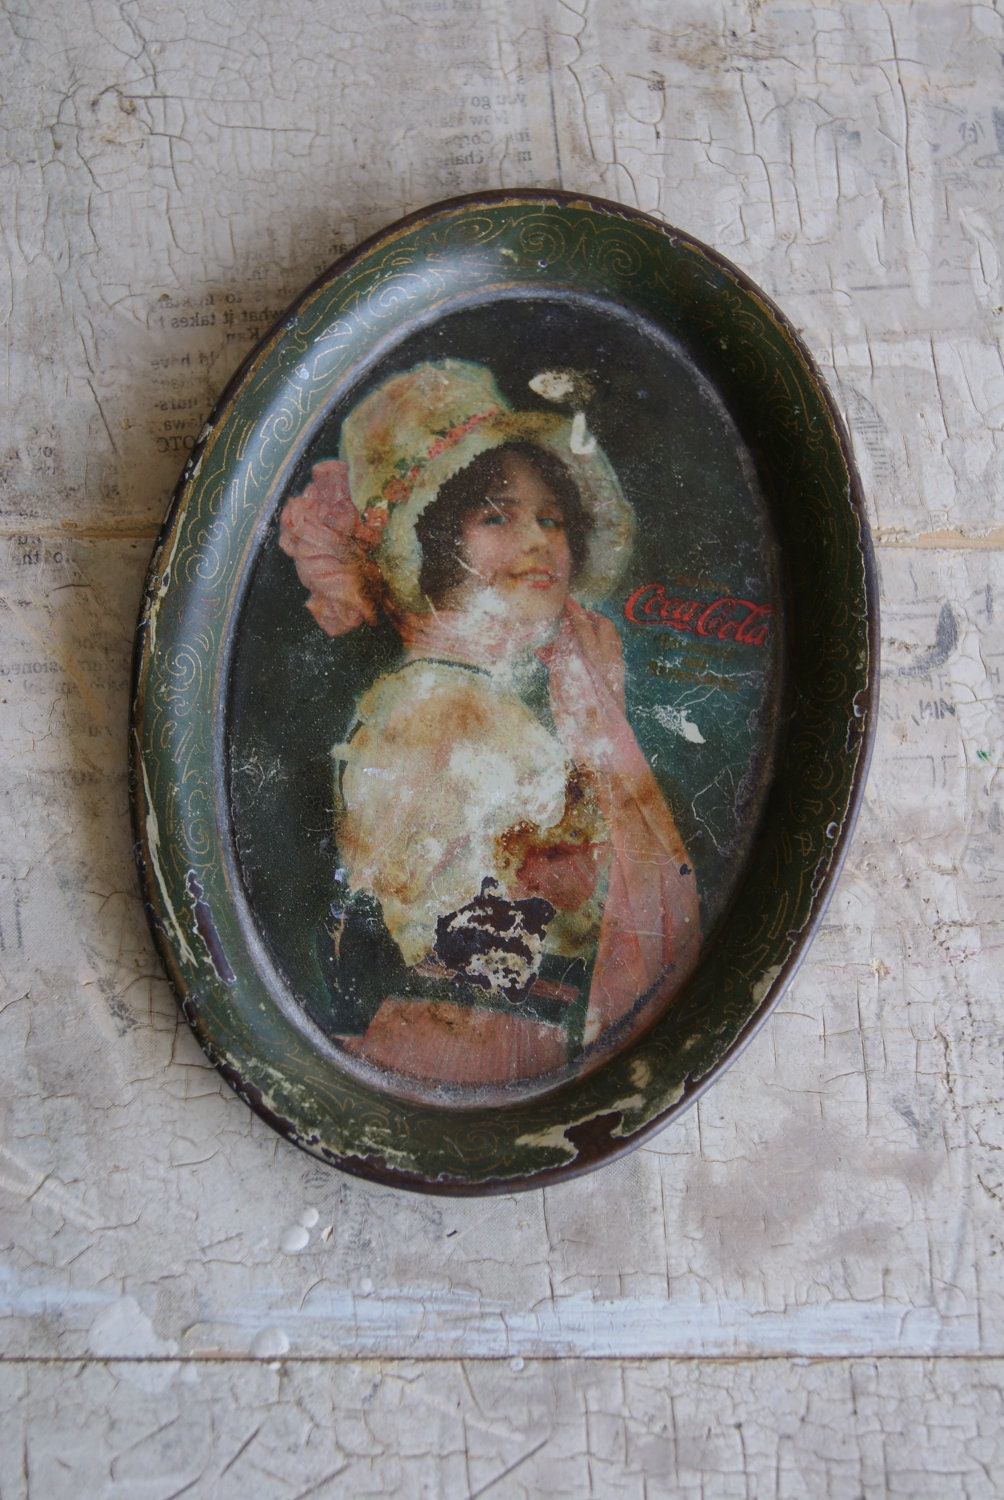 1914 Coca Cola Tip Tray With Picture Of Victorian Era Woman In Bonnet Or Hat